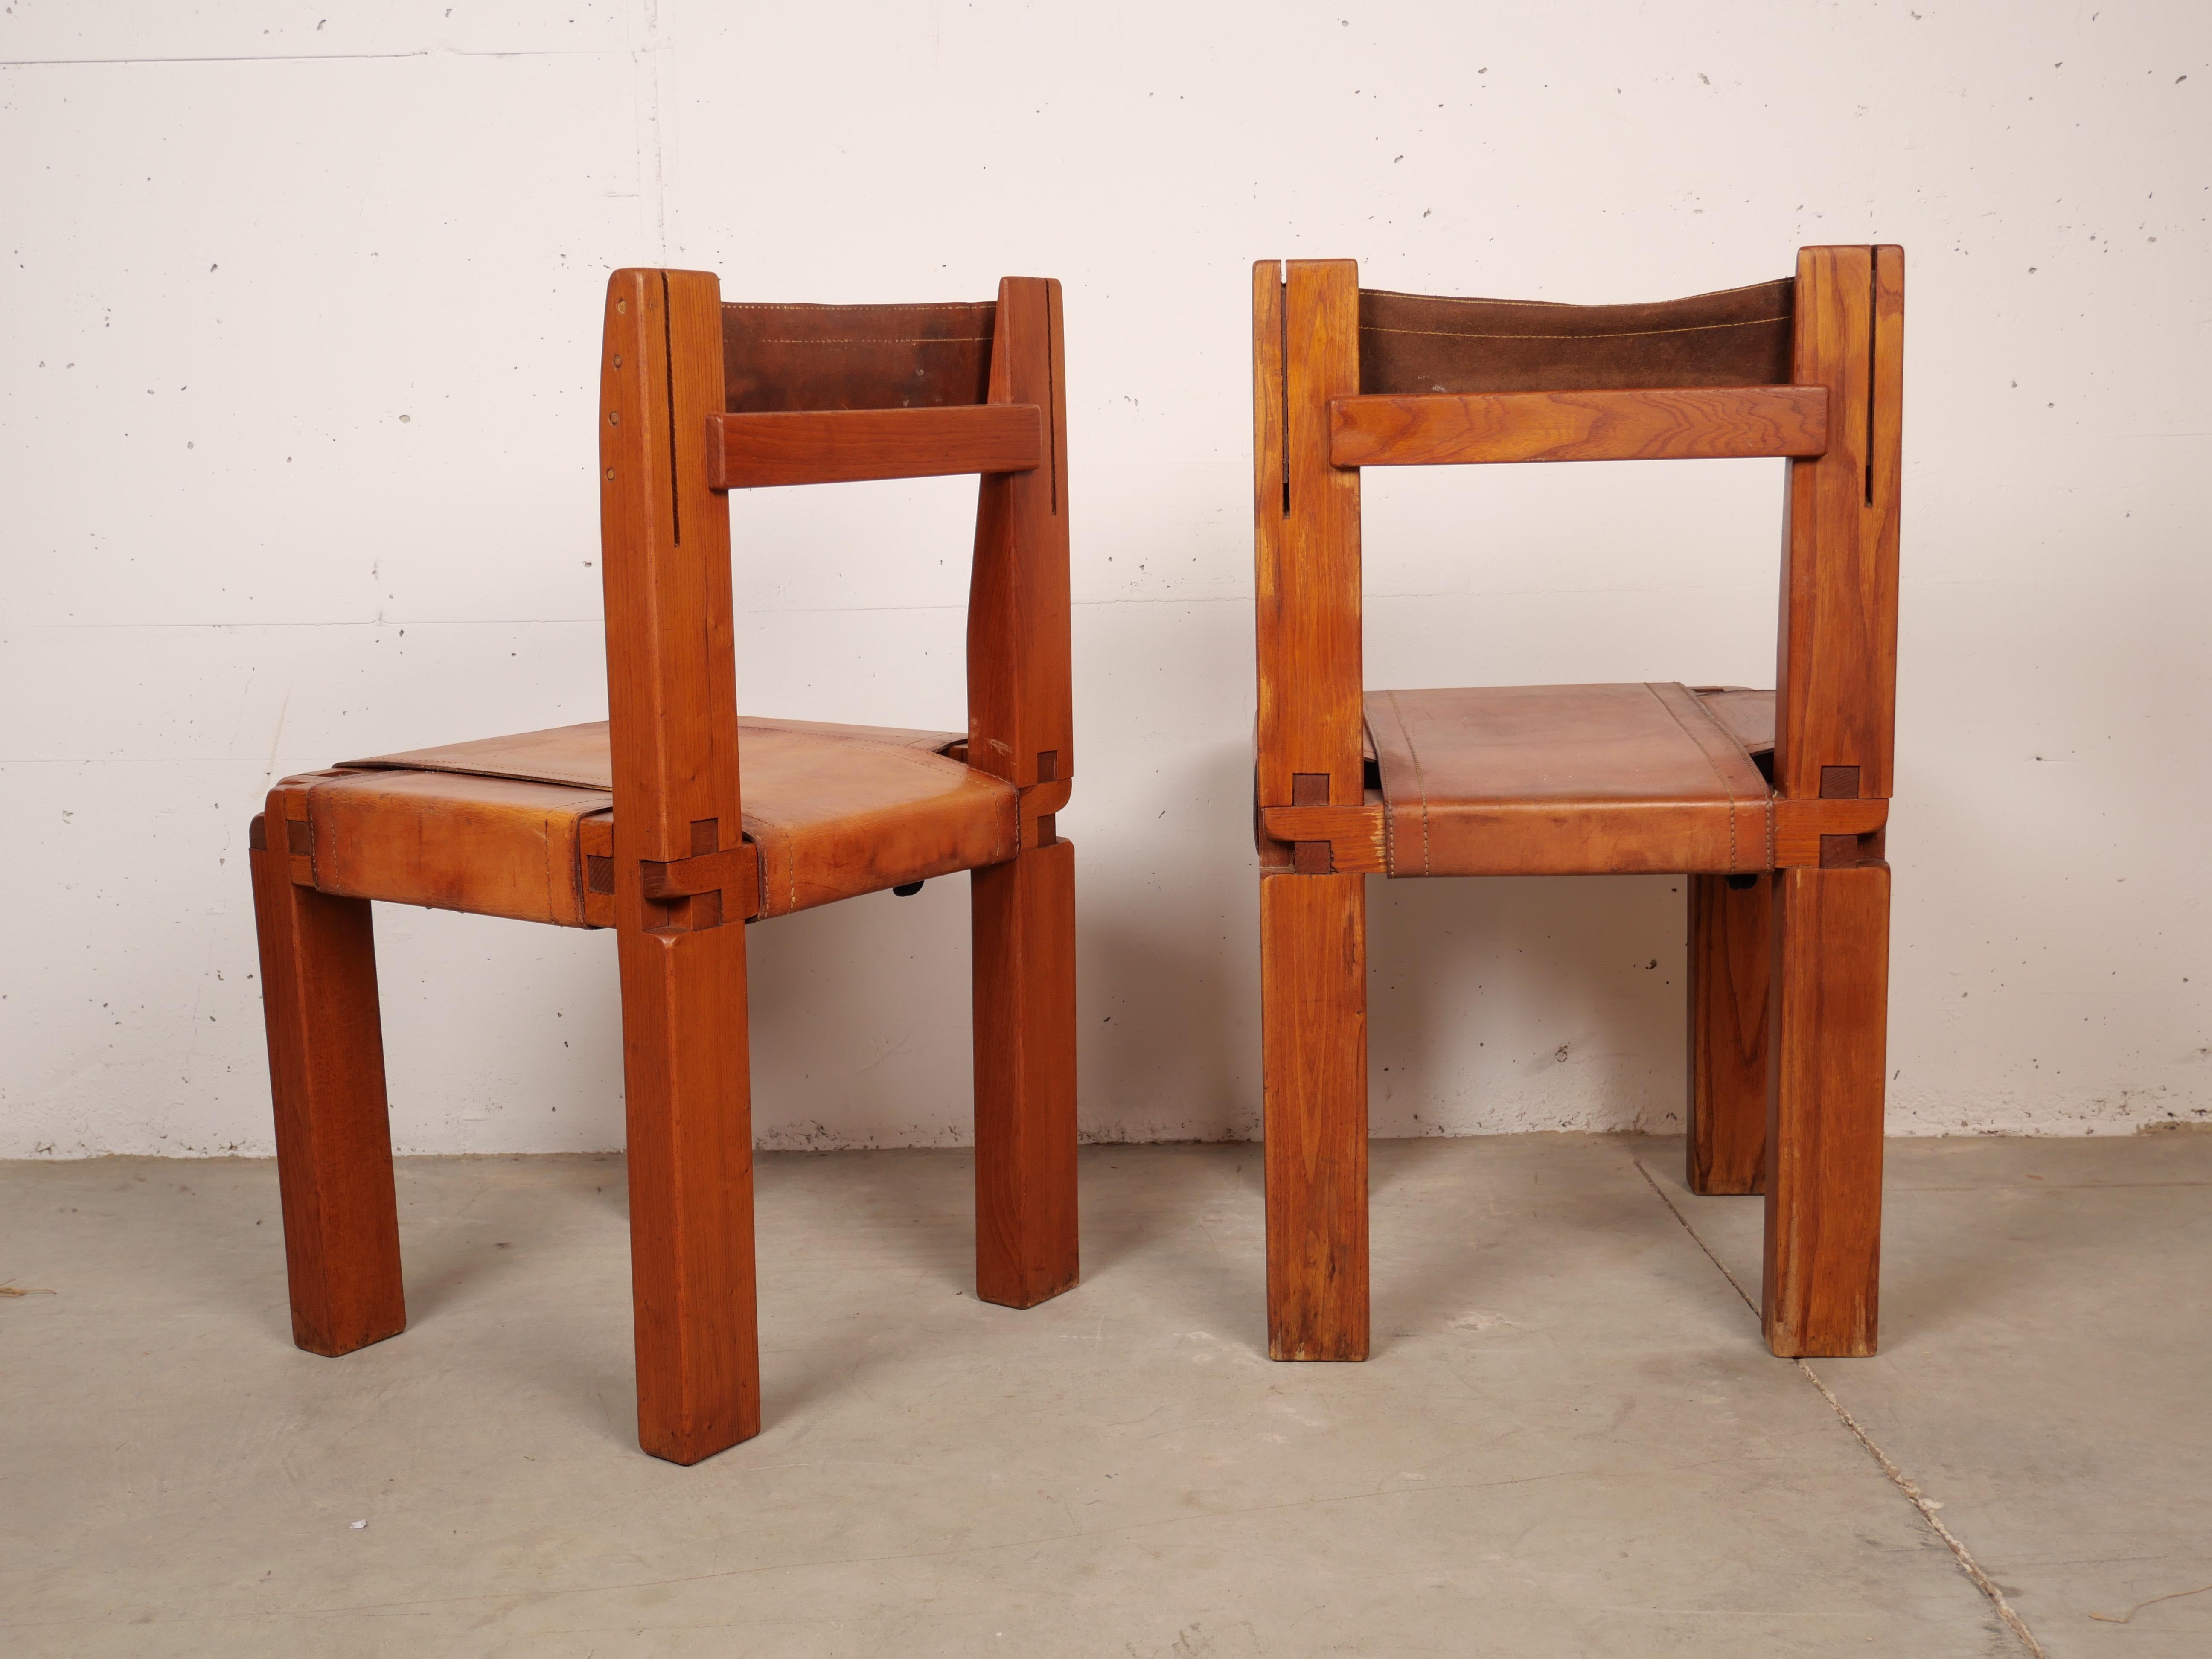 Pierre Chapo, Set of 4 Dining Chairs, Model S11, Elm and Leather, France 1970 1